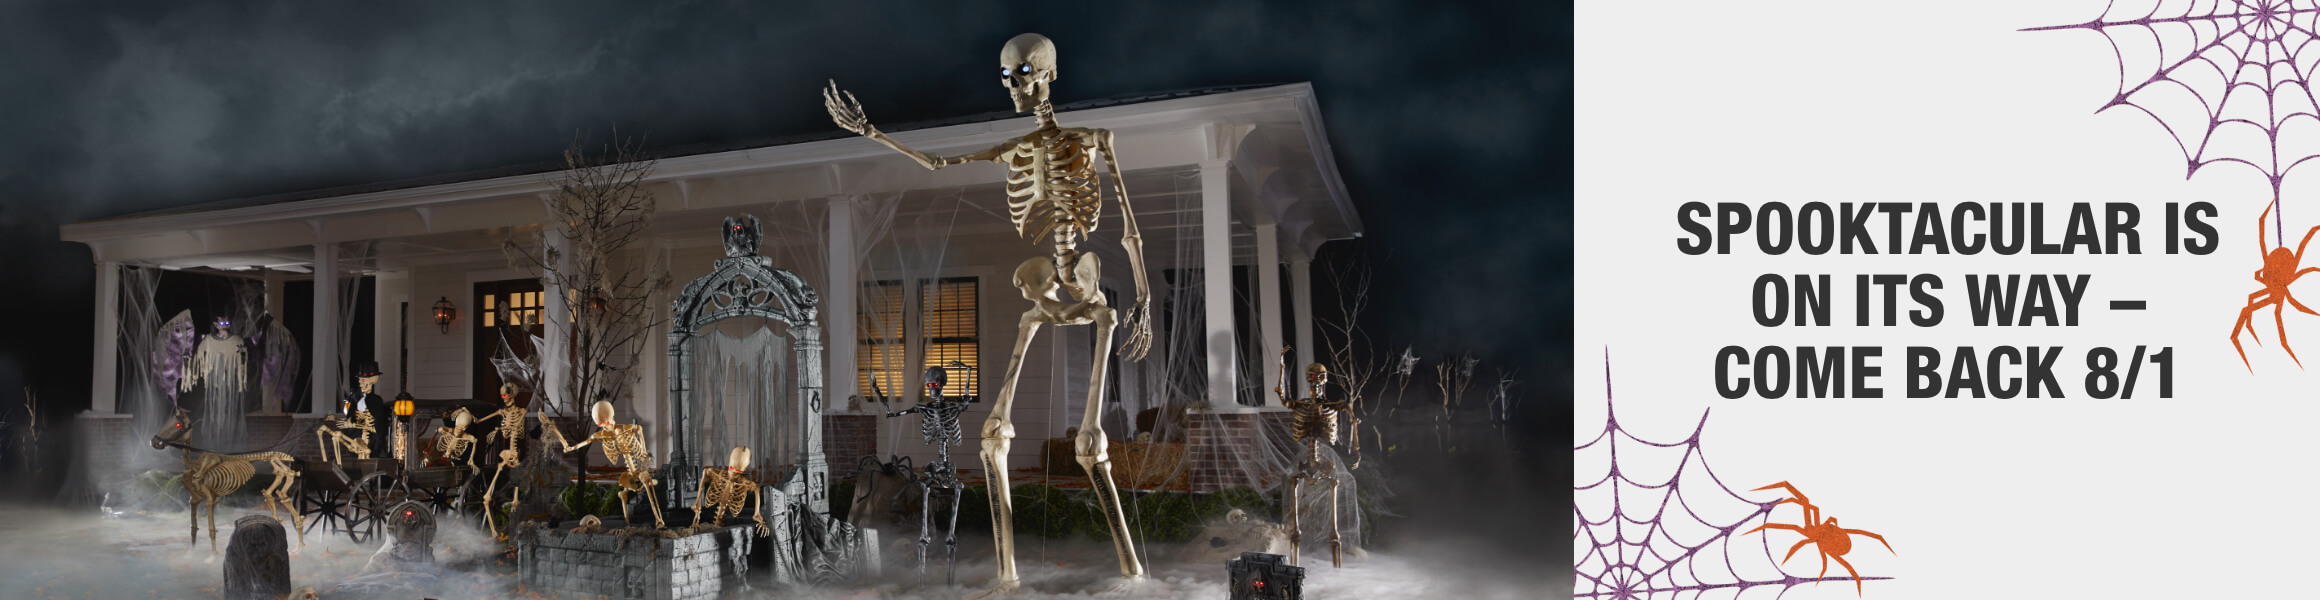 SPOOKTACULAR IS ON ITS WAY – COME BACK 8/1